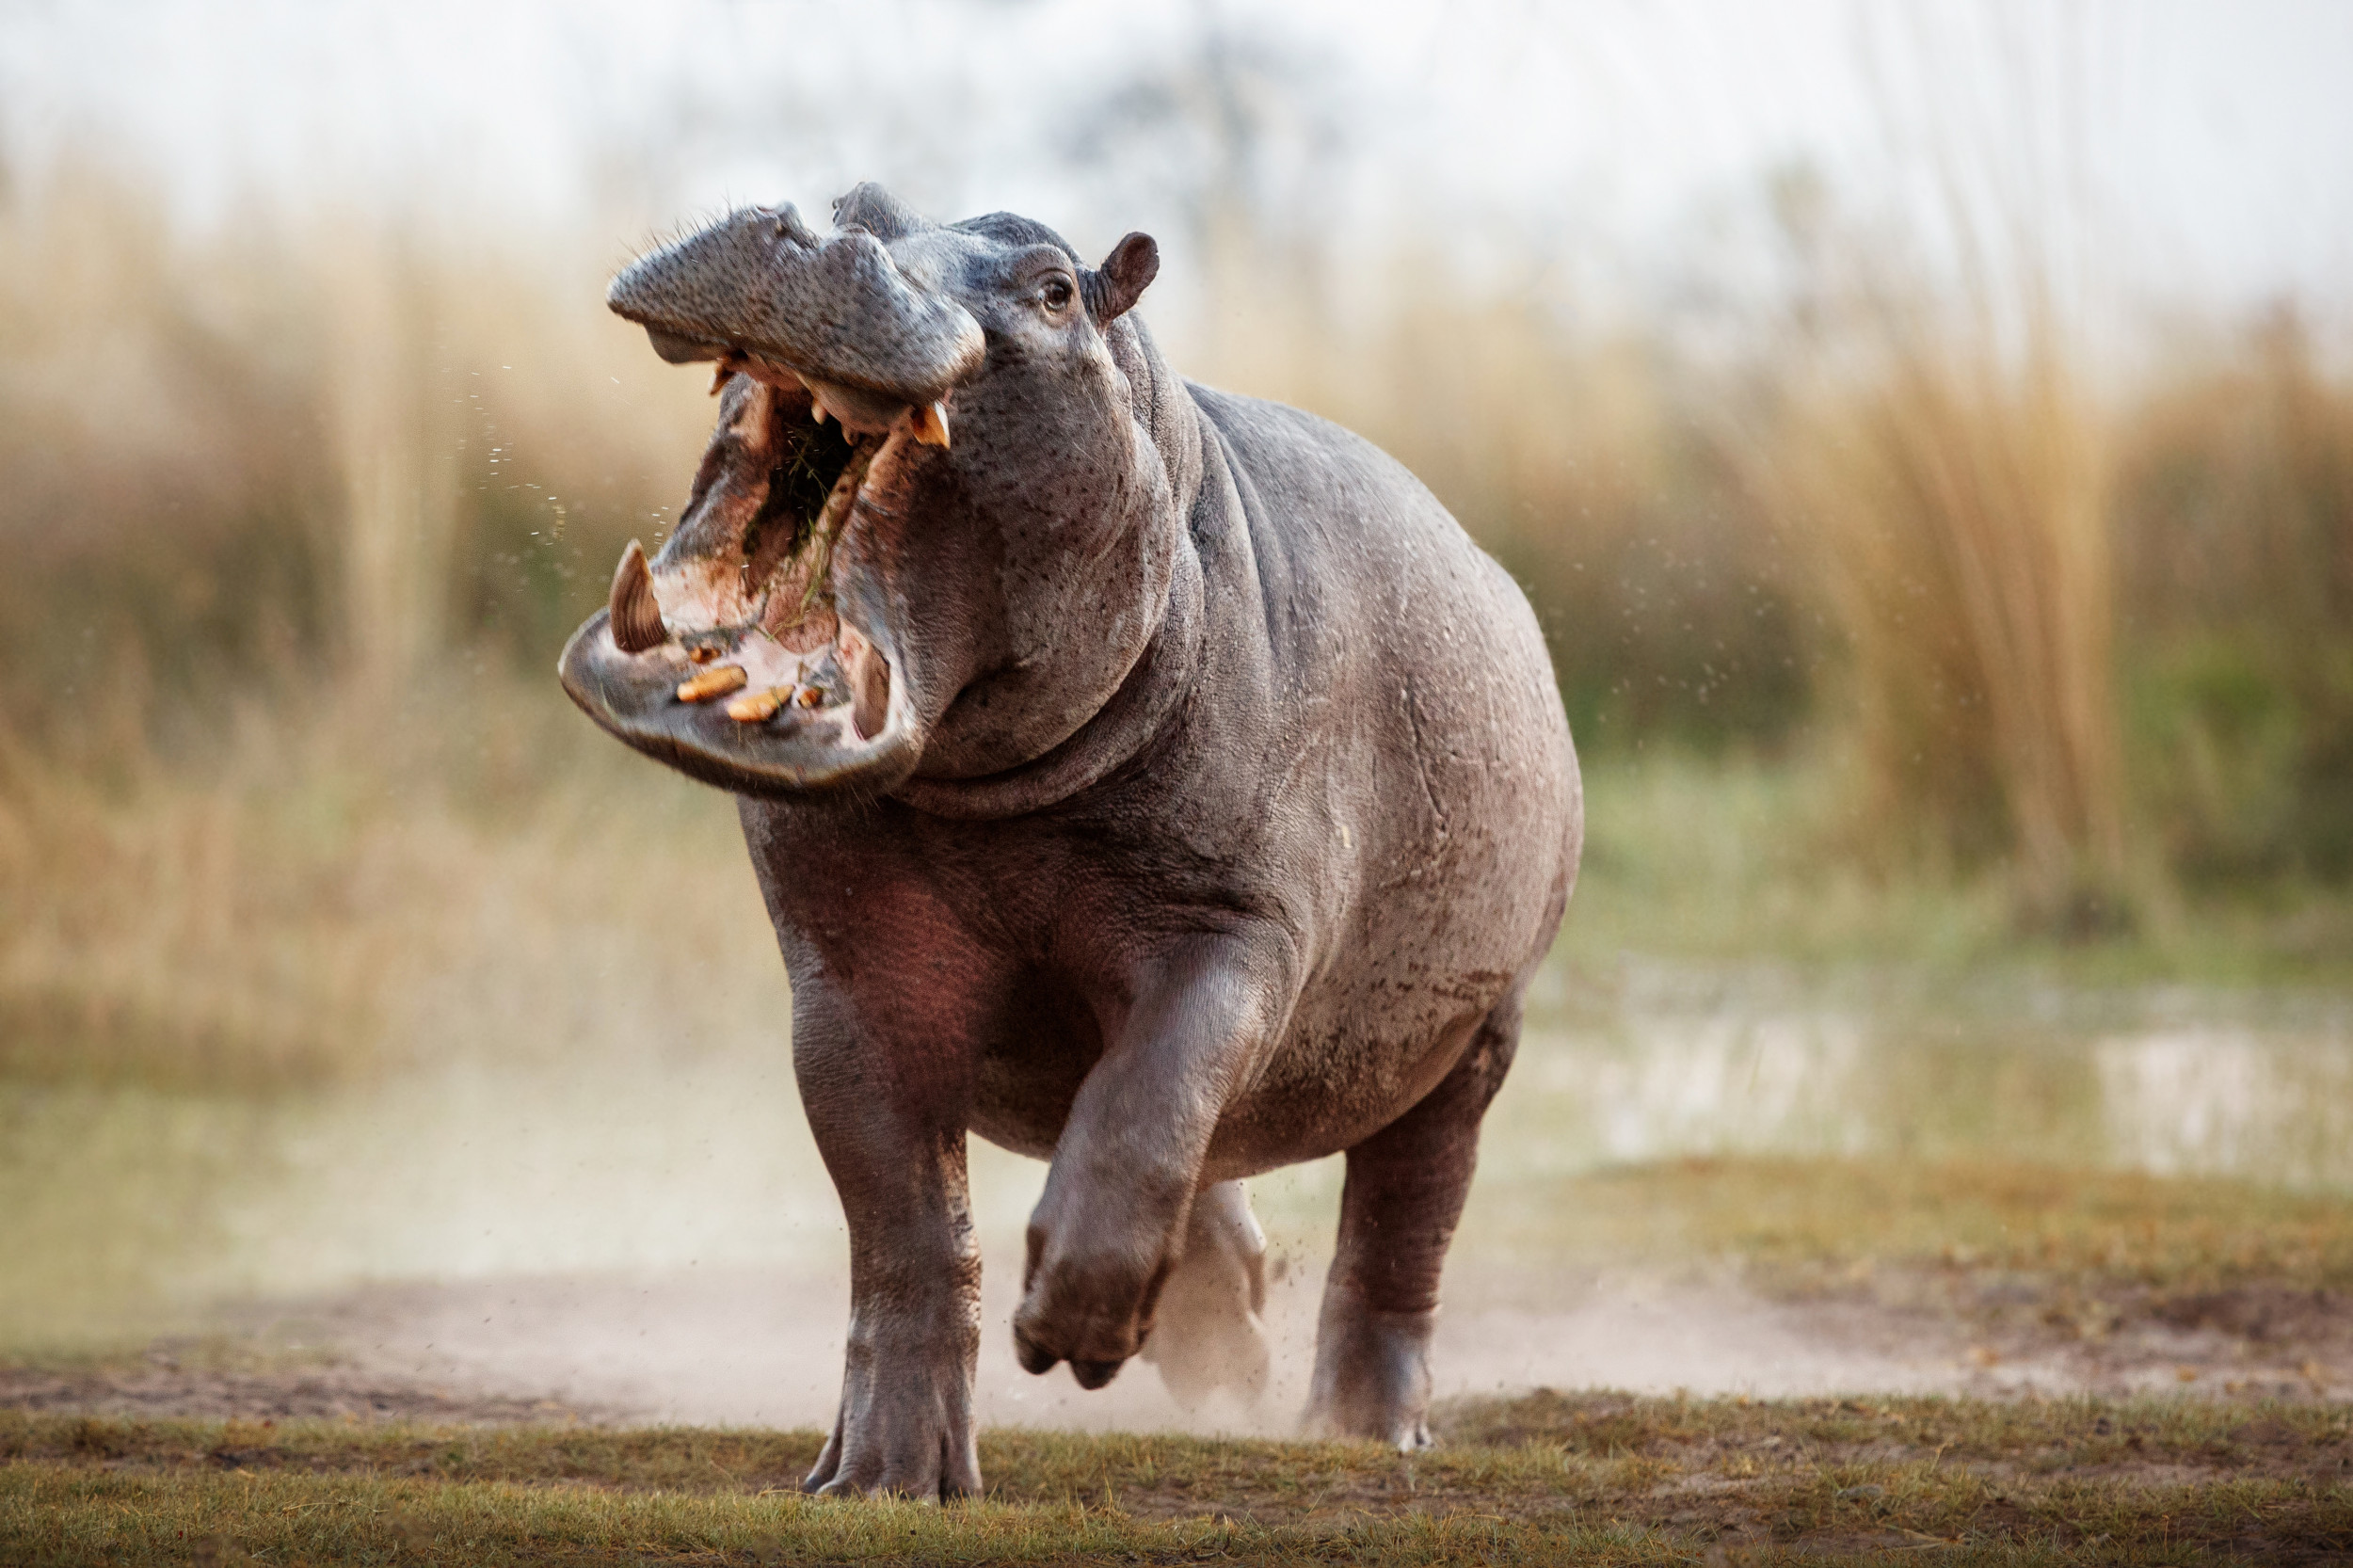 Beast' Hippo Attacks Man, Bites Large Chunk of Flesh From His Shoulder